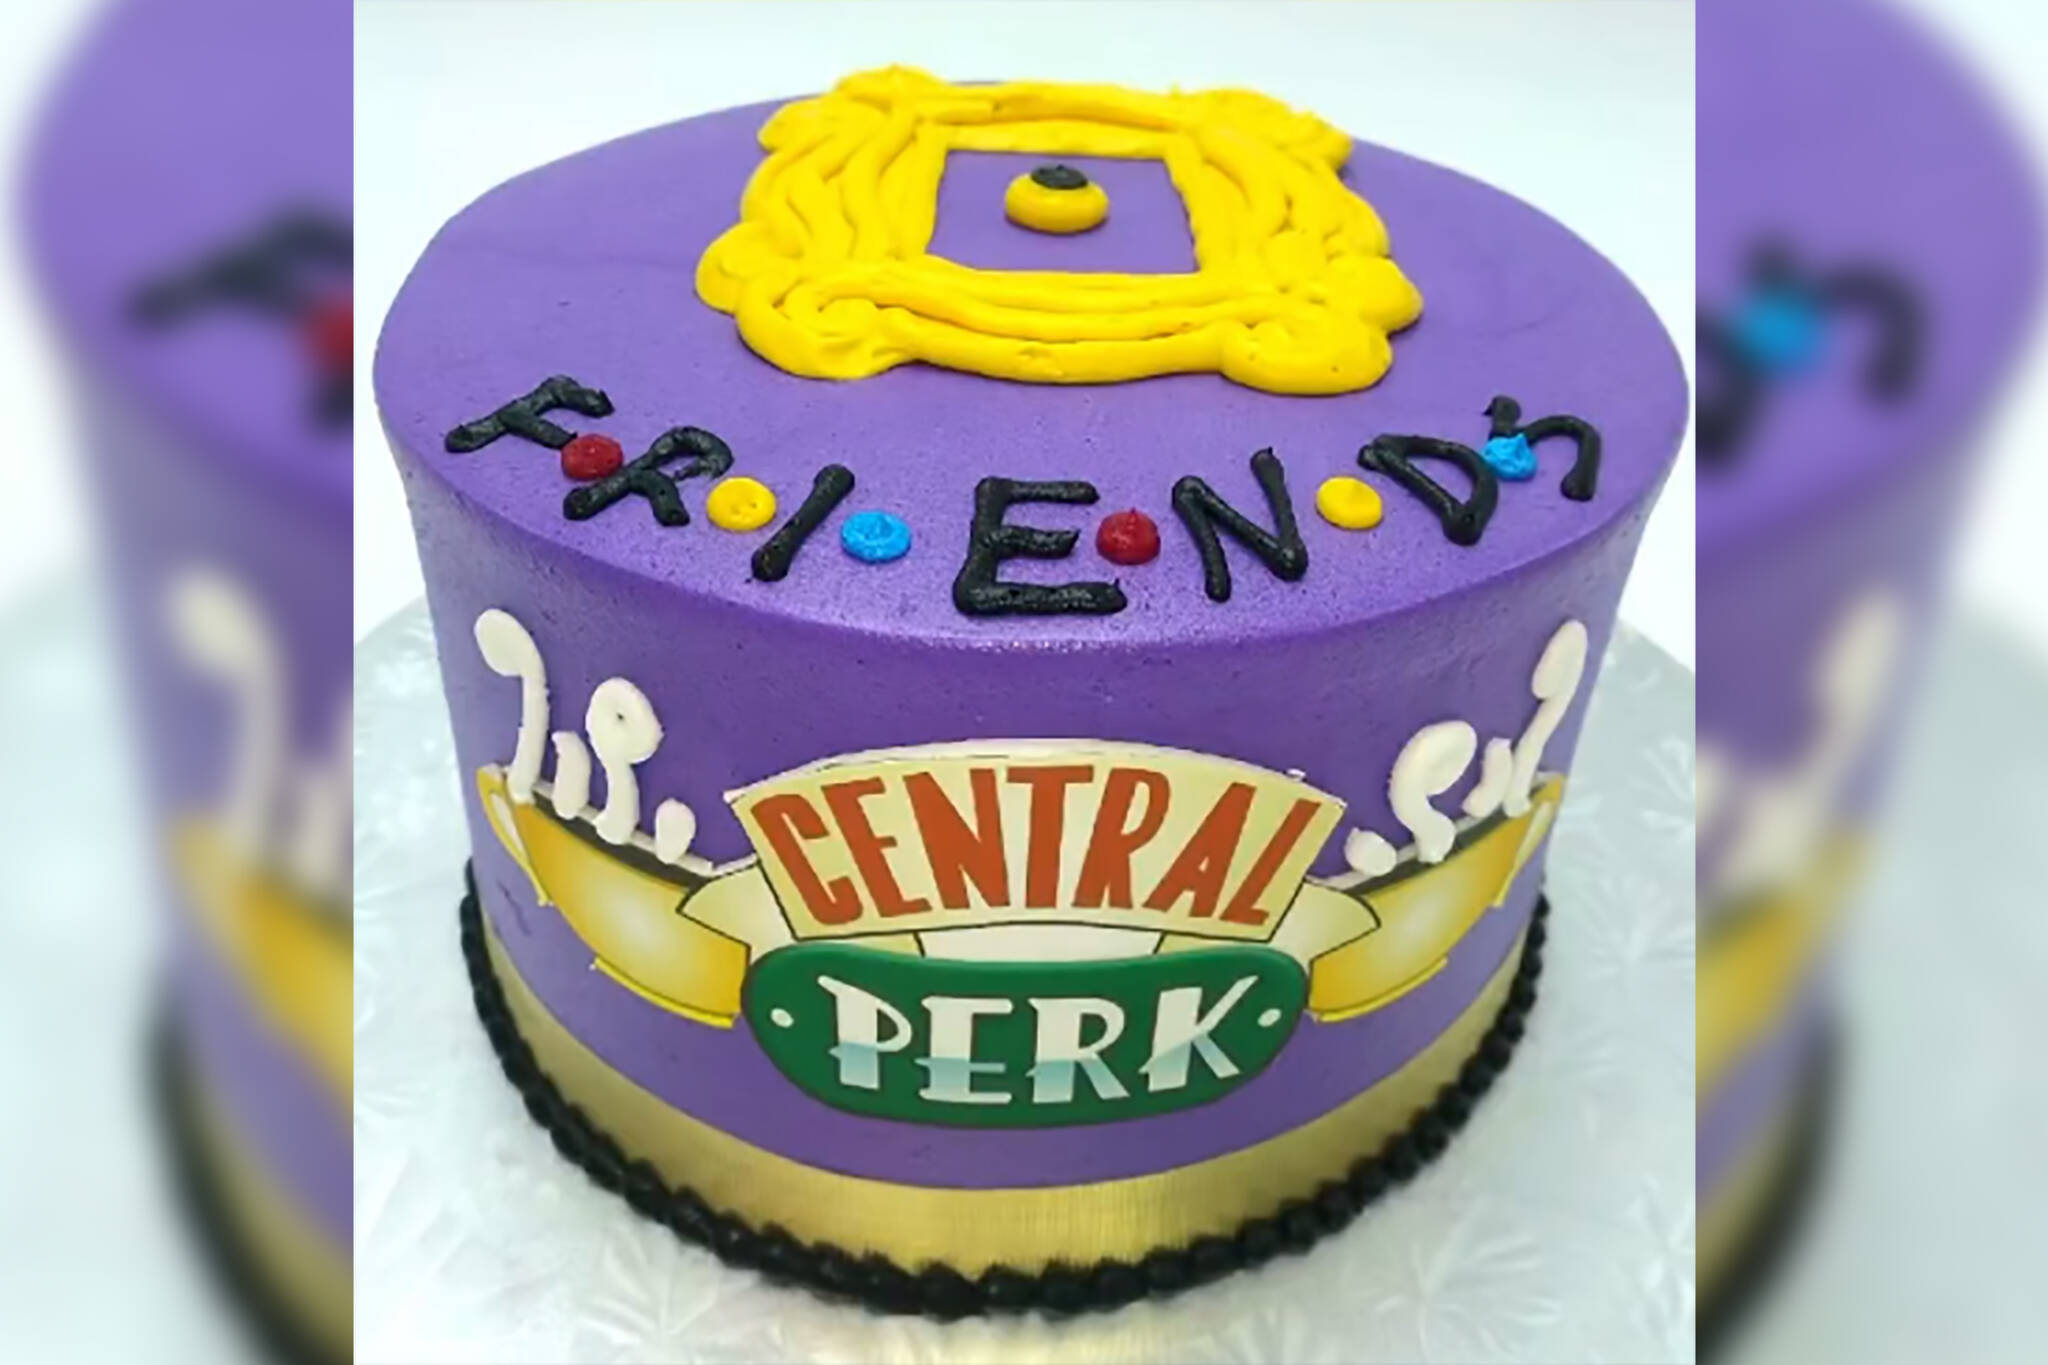 Toronto bakery creates epic cake in honour of the Friends reunion special